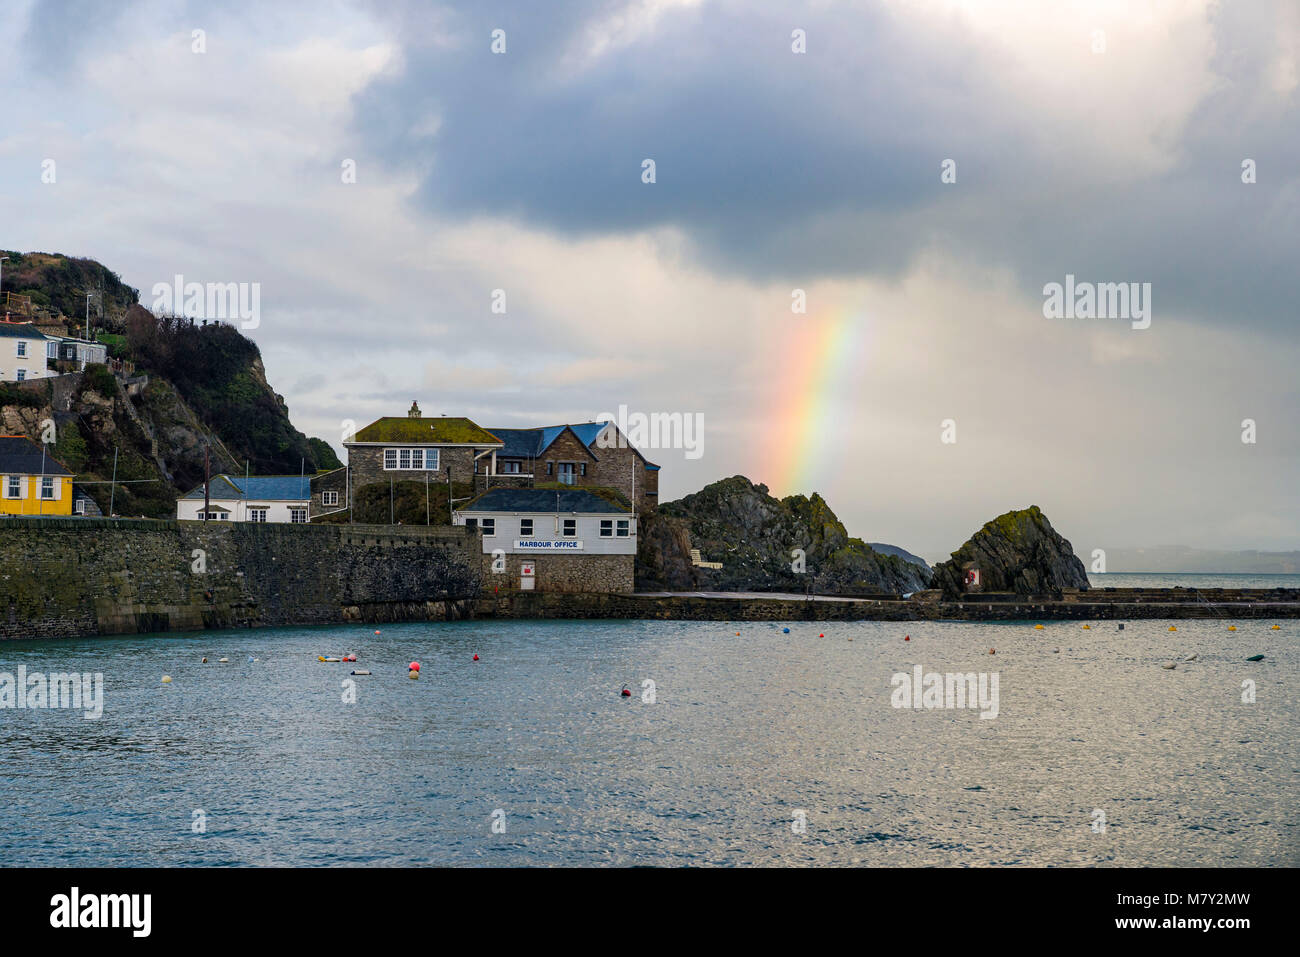 A Large Rainbow Streaks into the Sky at Mevagissey Harbour in Cornwall. The Harbour offices Generic sign can be seen clearly. Stock Photo